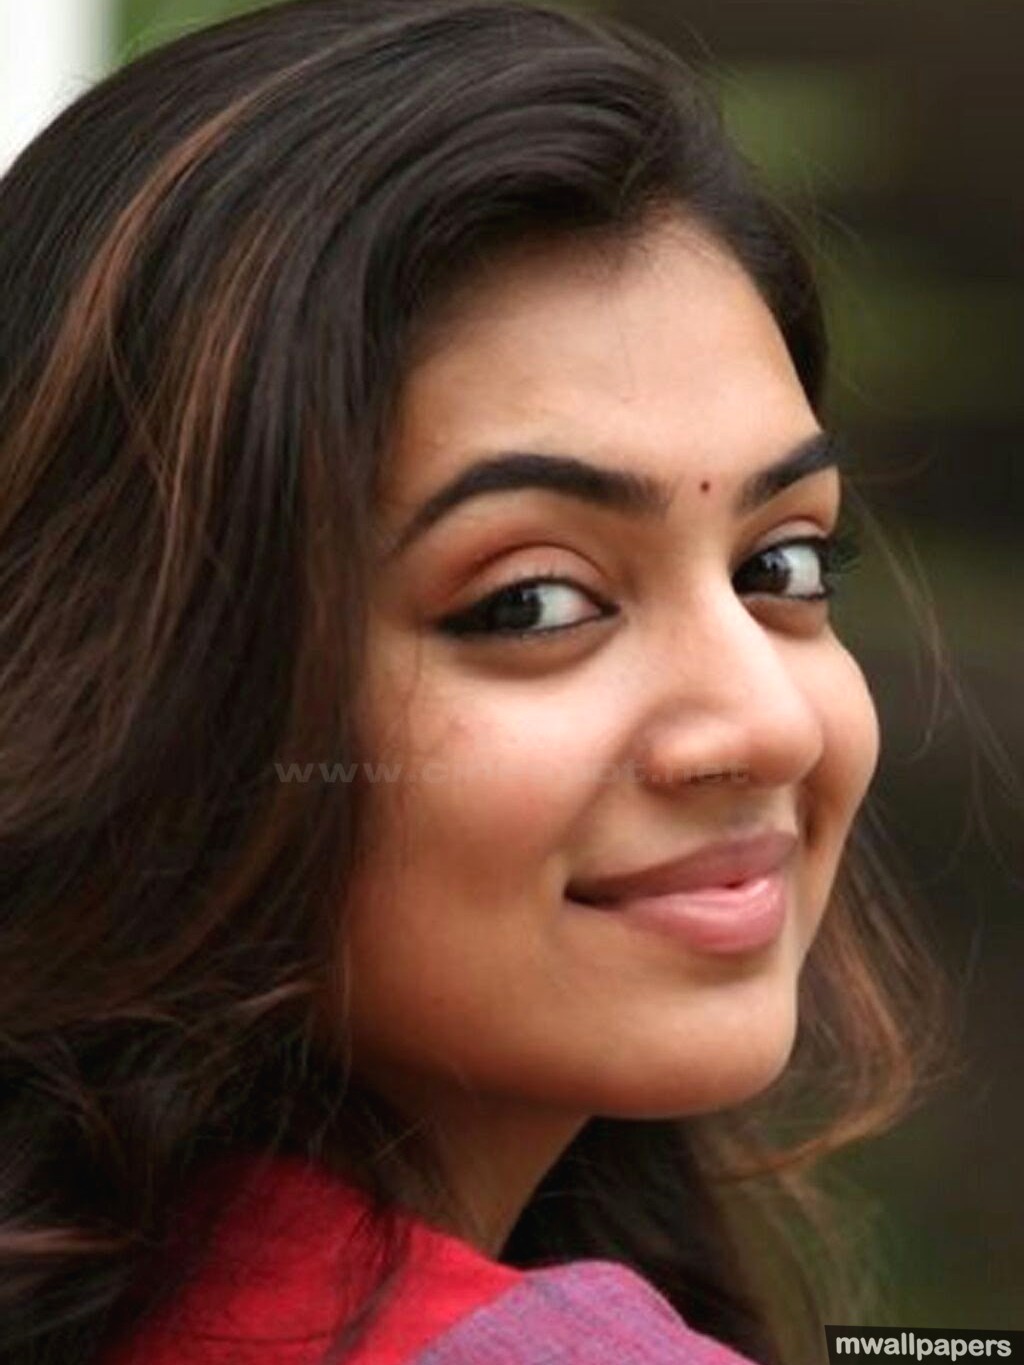 Download As Android/iphone Wallpaper - Nazriya Nazim Photos In Neram , HD Wallpaper & Backgrounds